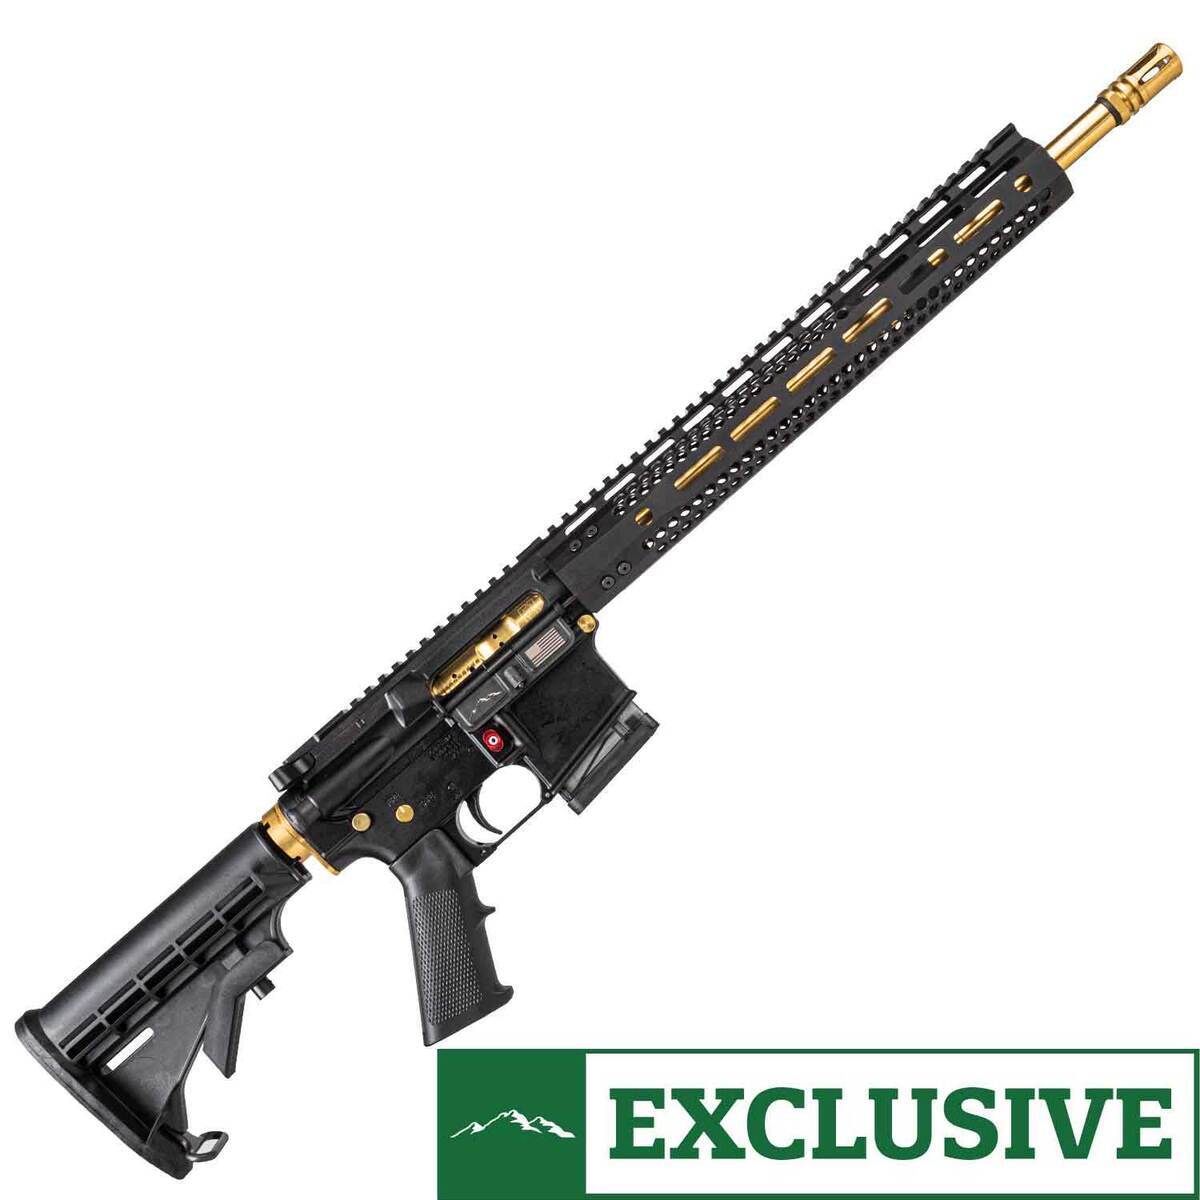 Sportsman's Warehouse: Buy an F1 Firearms MSR and get a free